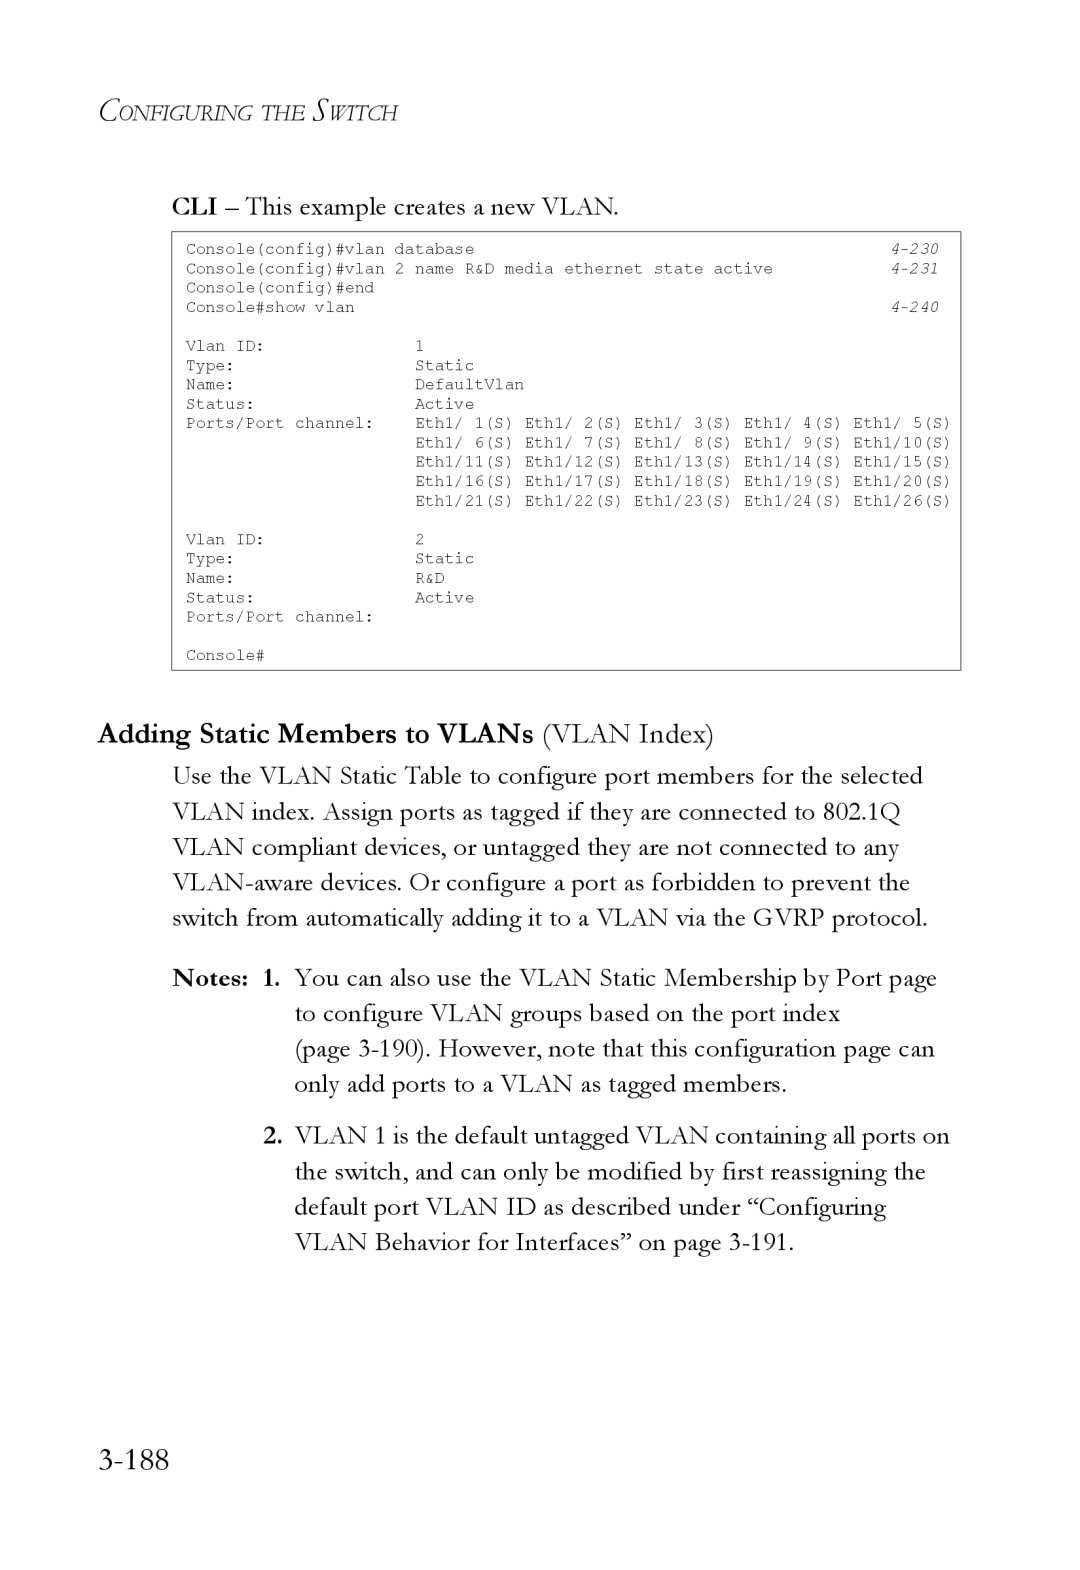 SMC Networks SMC6824M manual 188, Adding Static Members to VLANs Vlan Index, CLI This example creates a new Vlan 